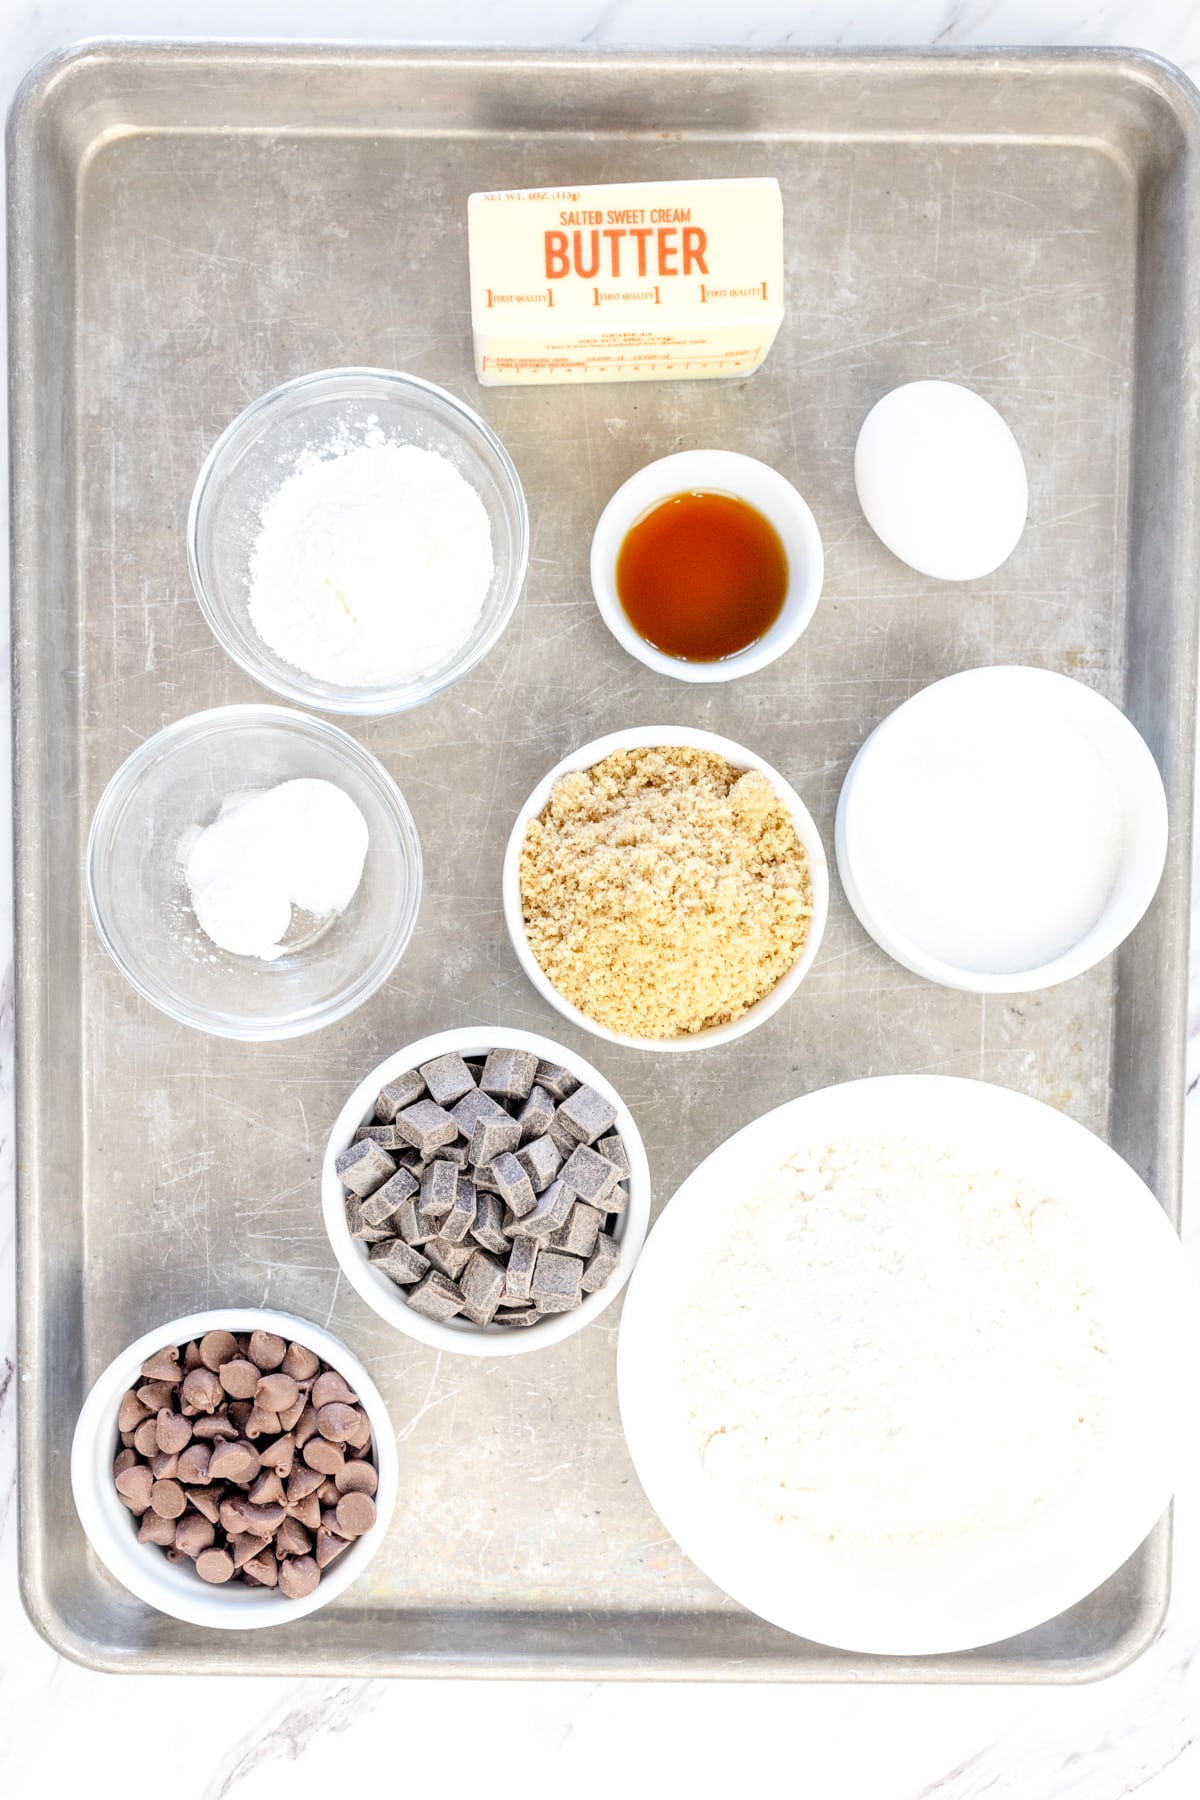 Top view of ingredients needed to make Frosted Chocolate Chip Cookies in small bowls on a baking tray. 